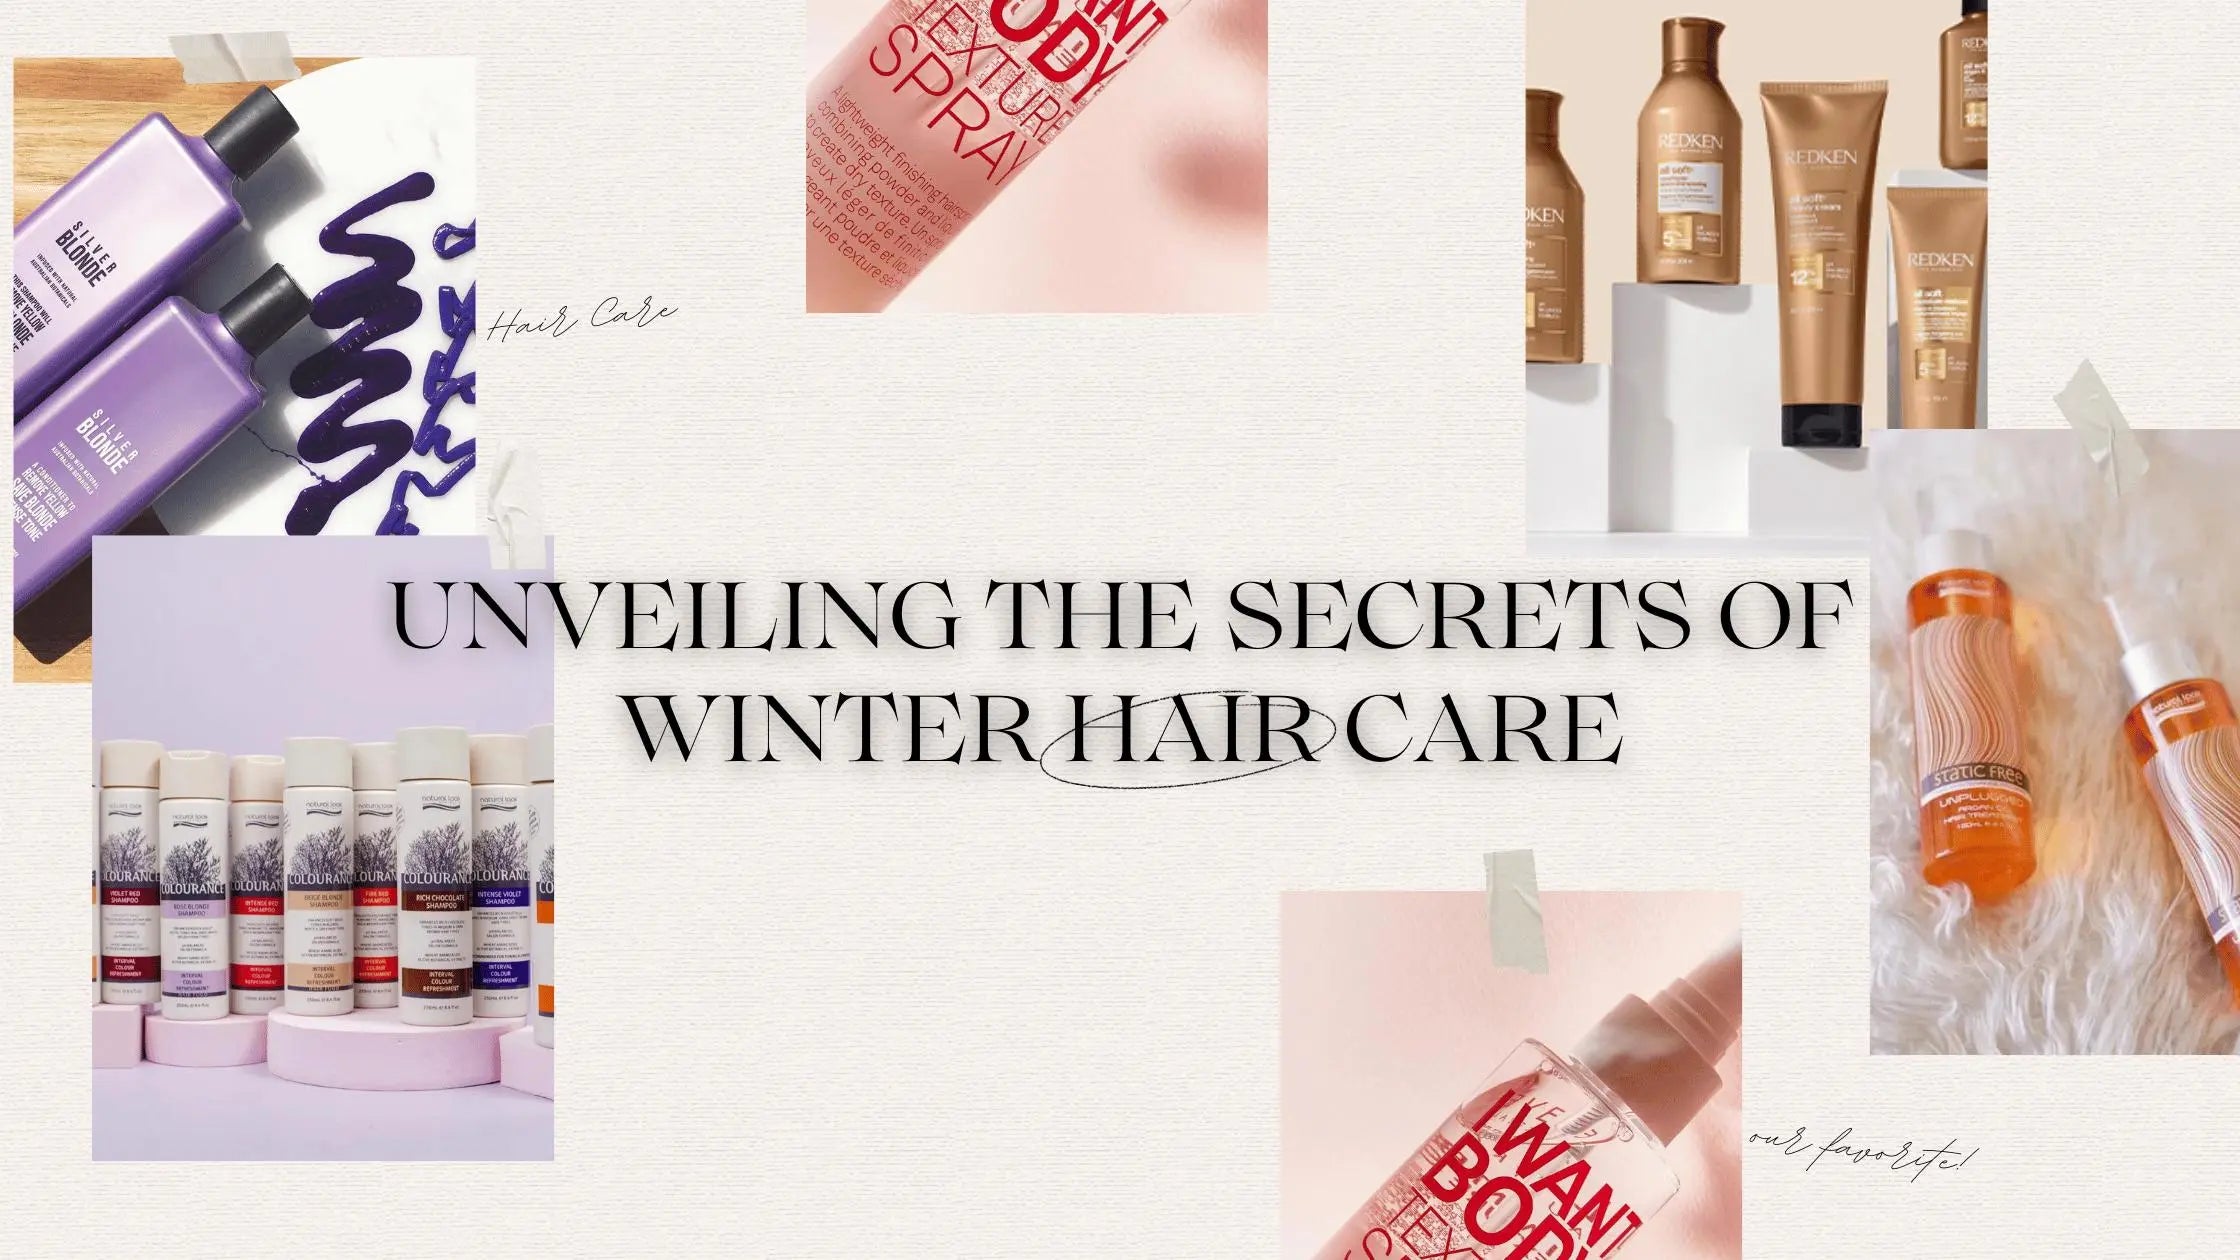 Unveiling the Secrets of Winter Hair Care: Natural Look and Redken Lead the Way